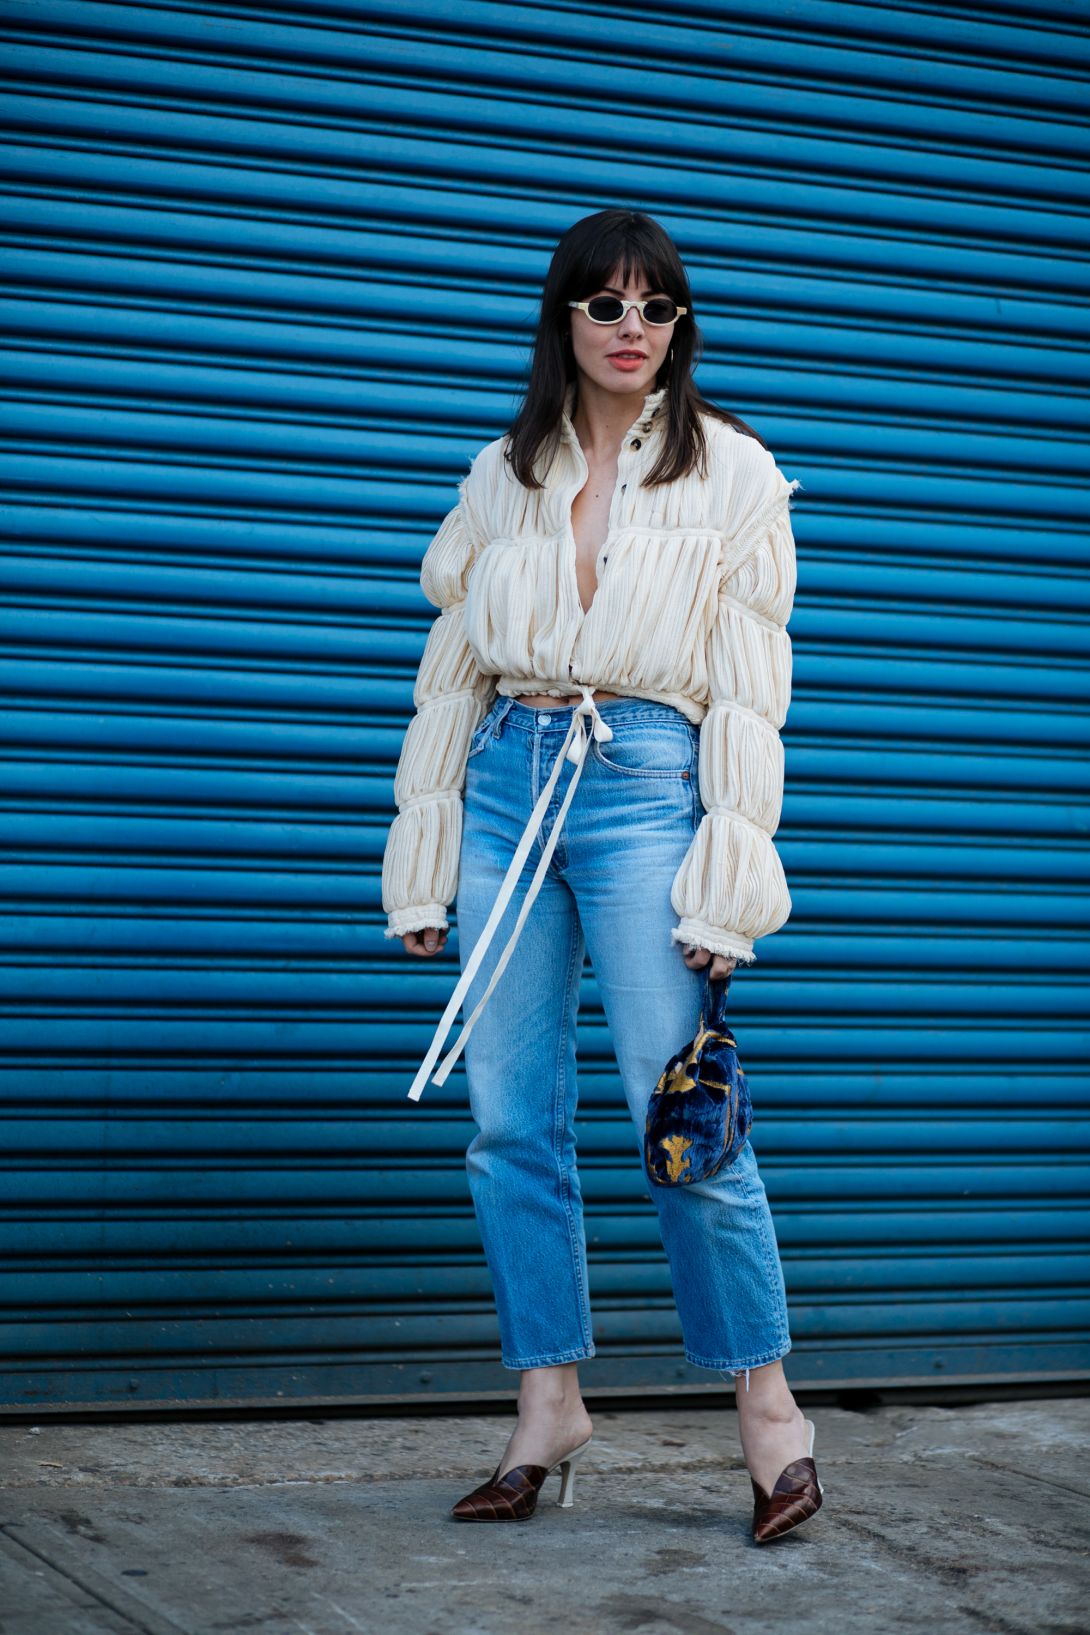 Denim Street Style From New York Fashion Week SS18 - THE JEANS BLOG